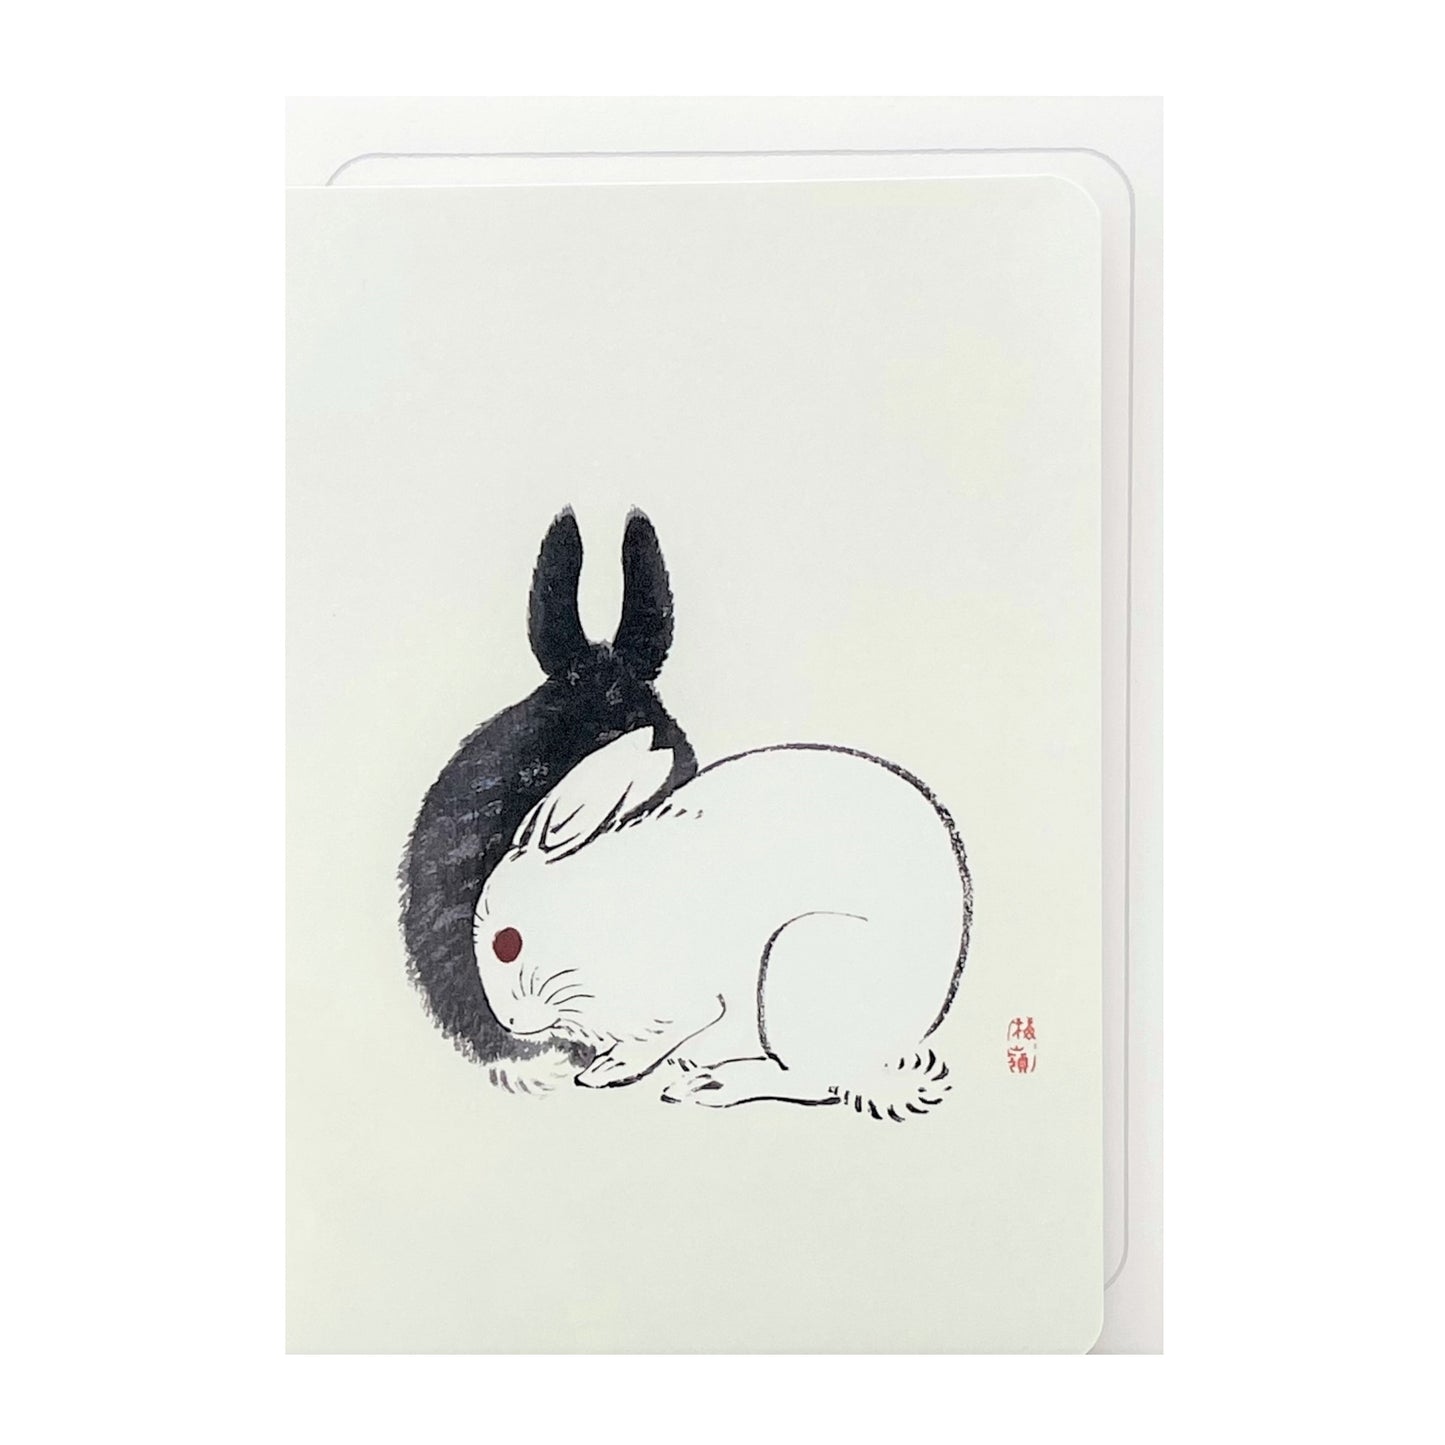 greetings card showing a drawing of one black rabbit and one white rabbit sitting together by Ezen Design